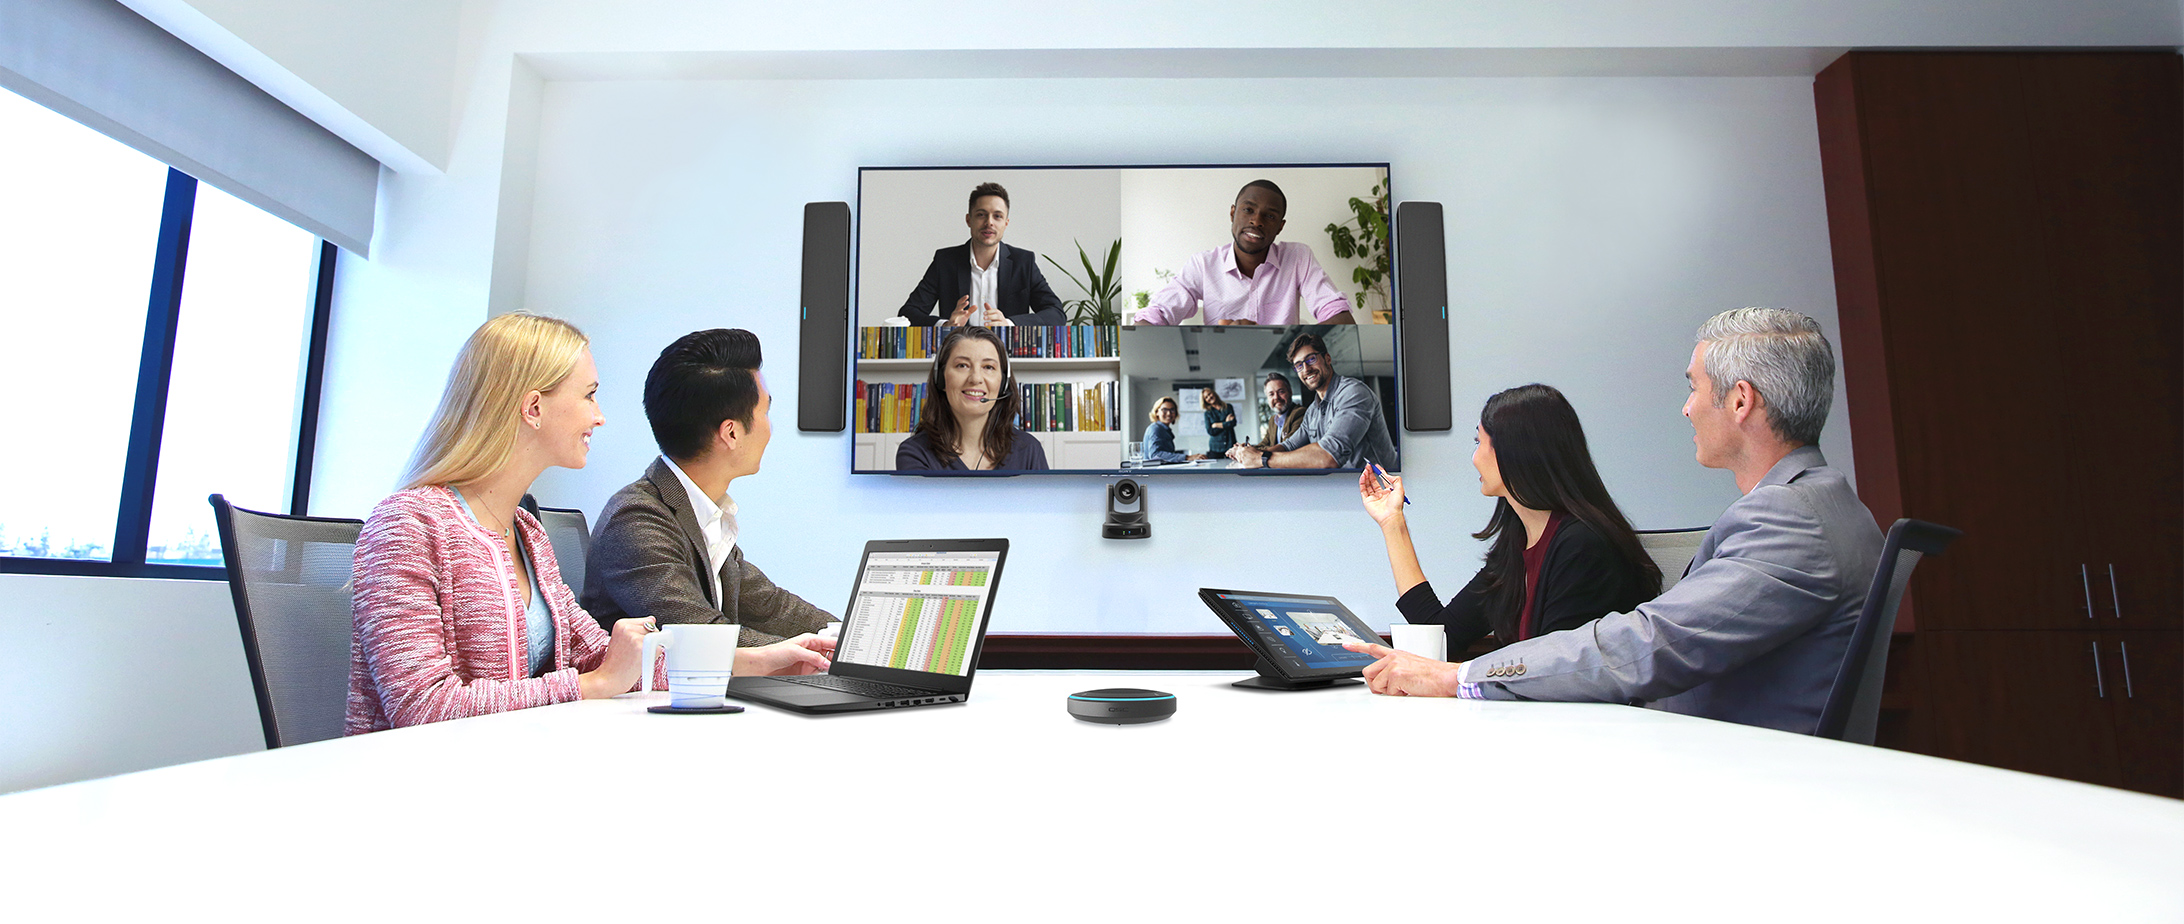 Office participating in a video conference call utilizing various Q-SYS products